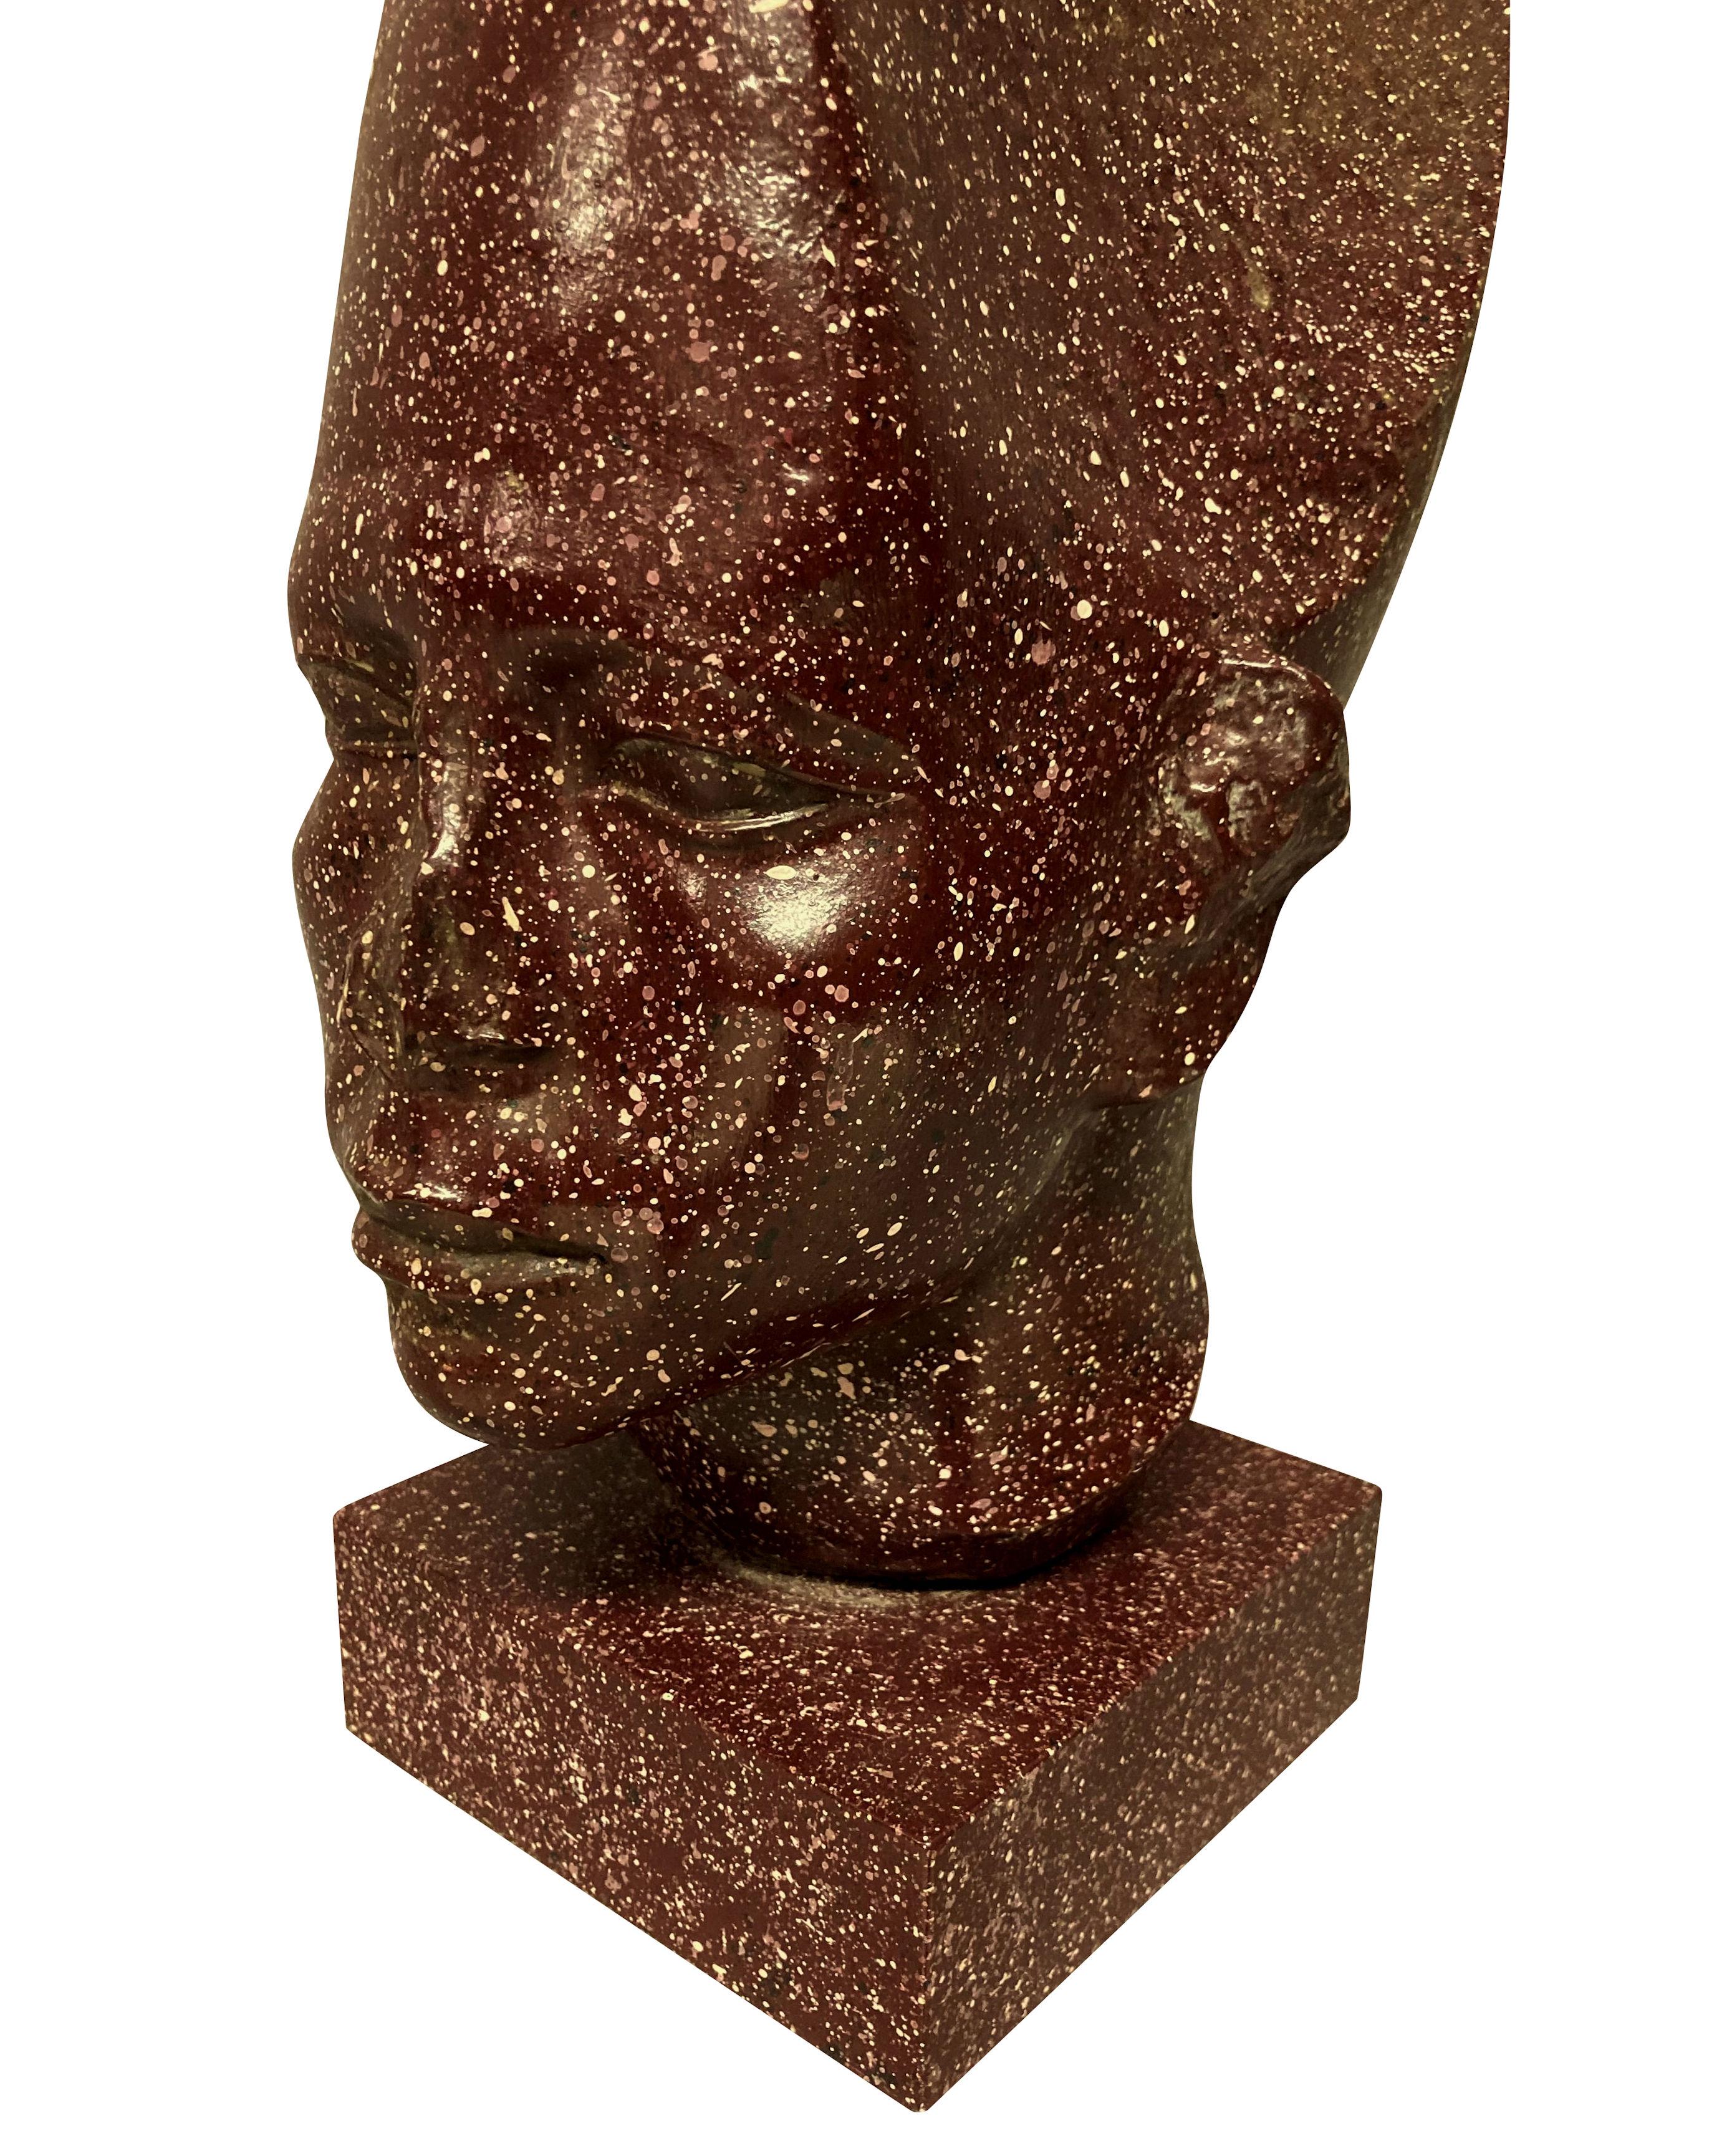 An English faux porphyry Egyptian head on plinth by Redmile, after the antique.